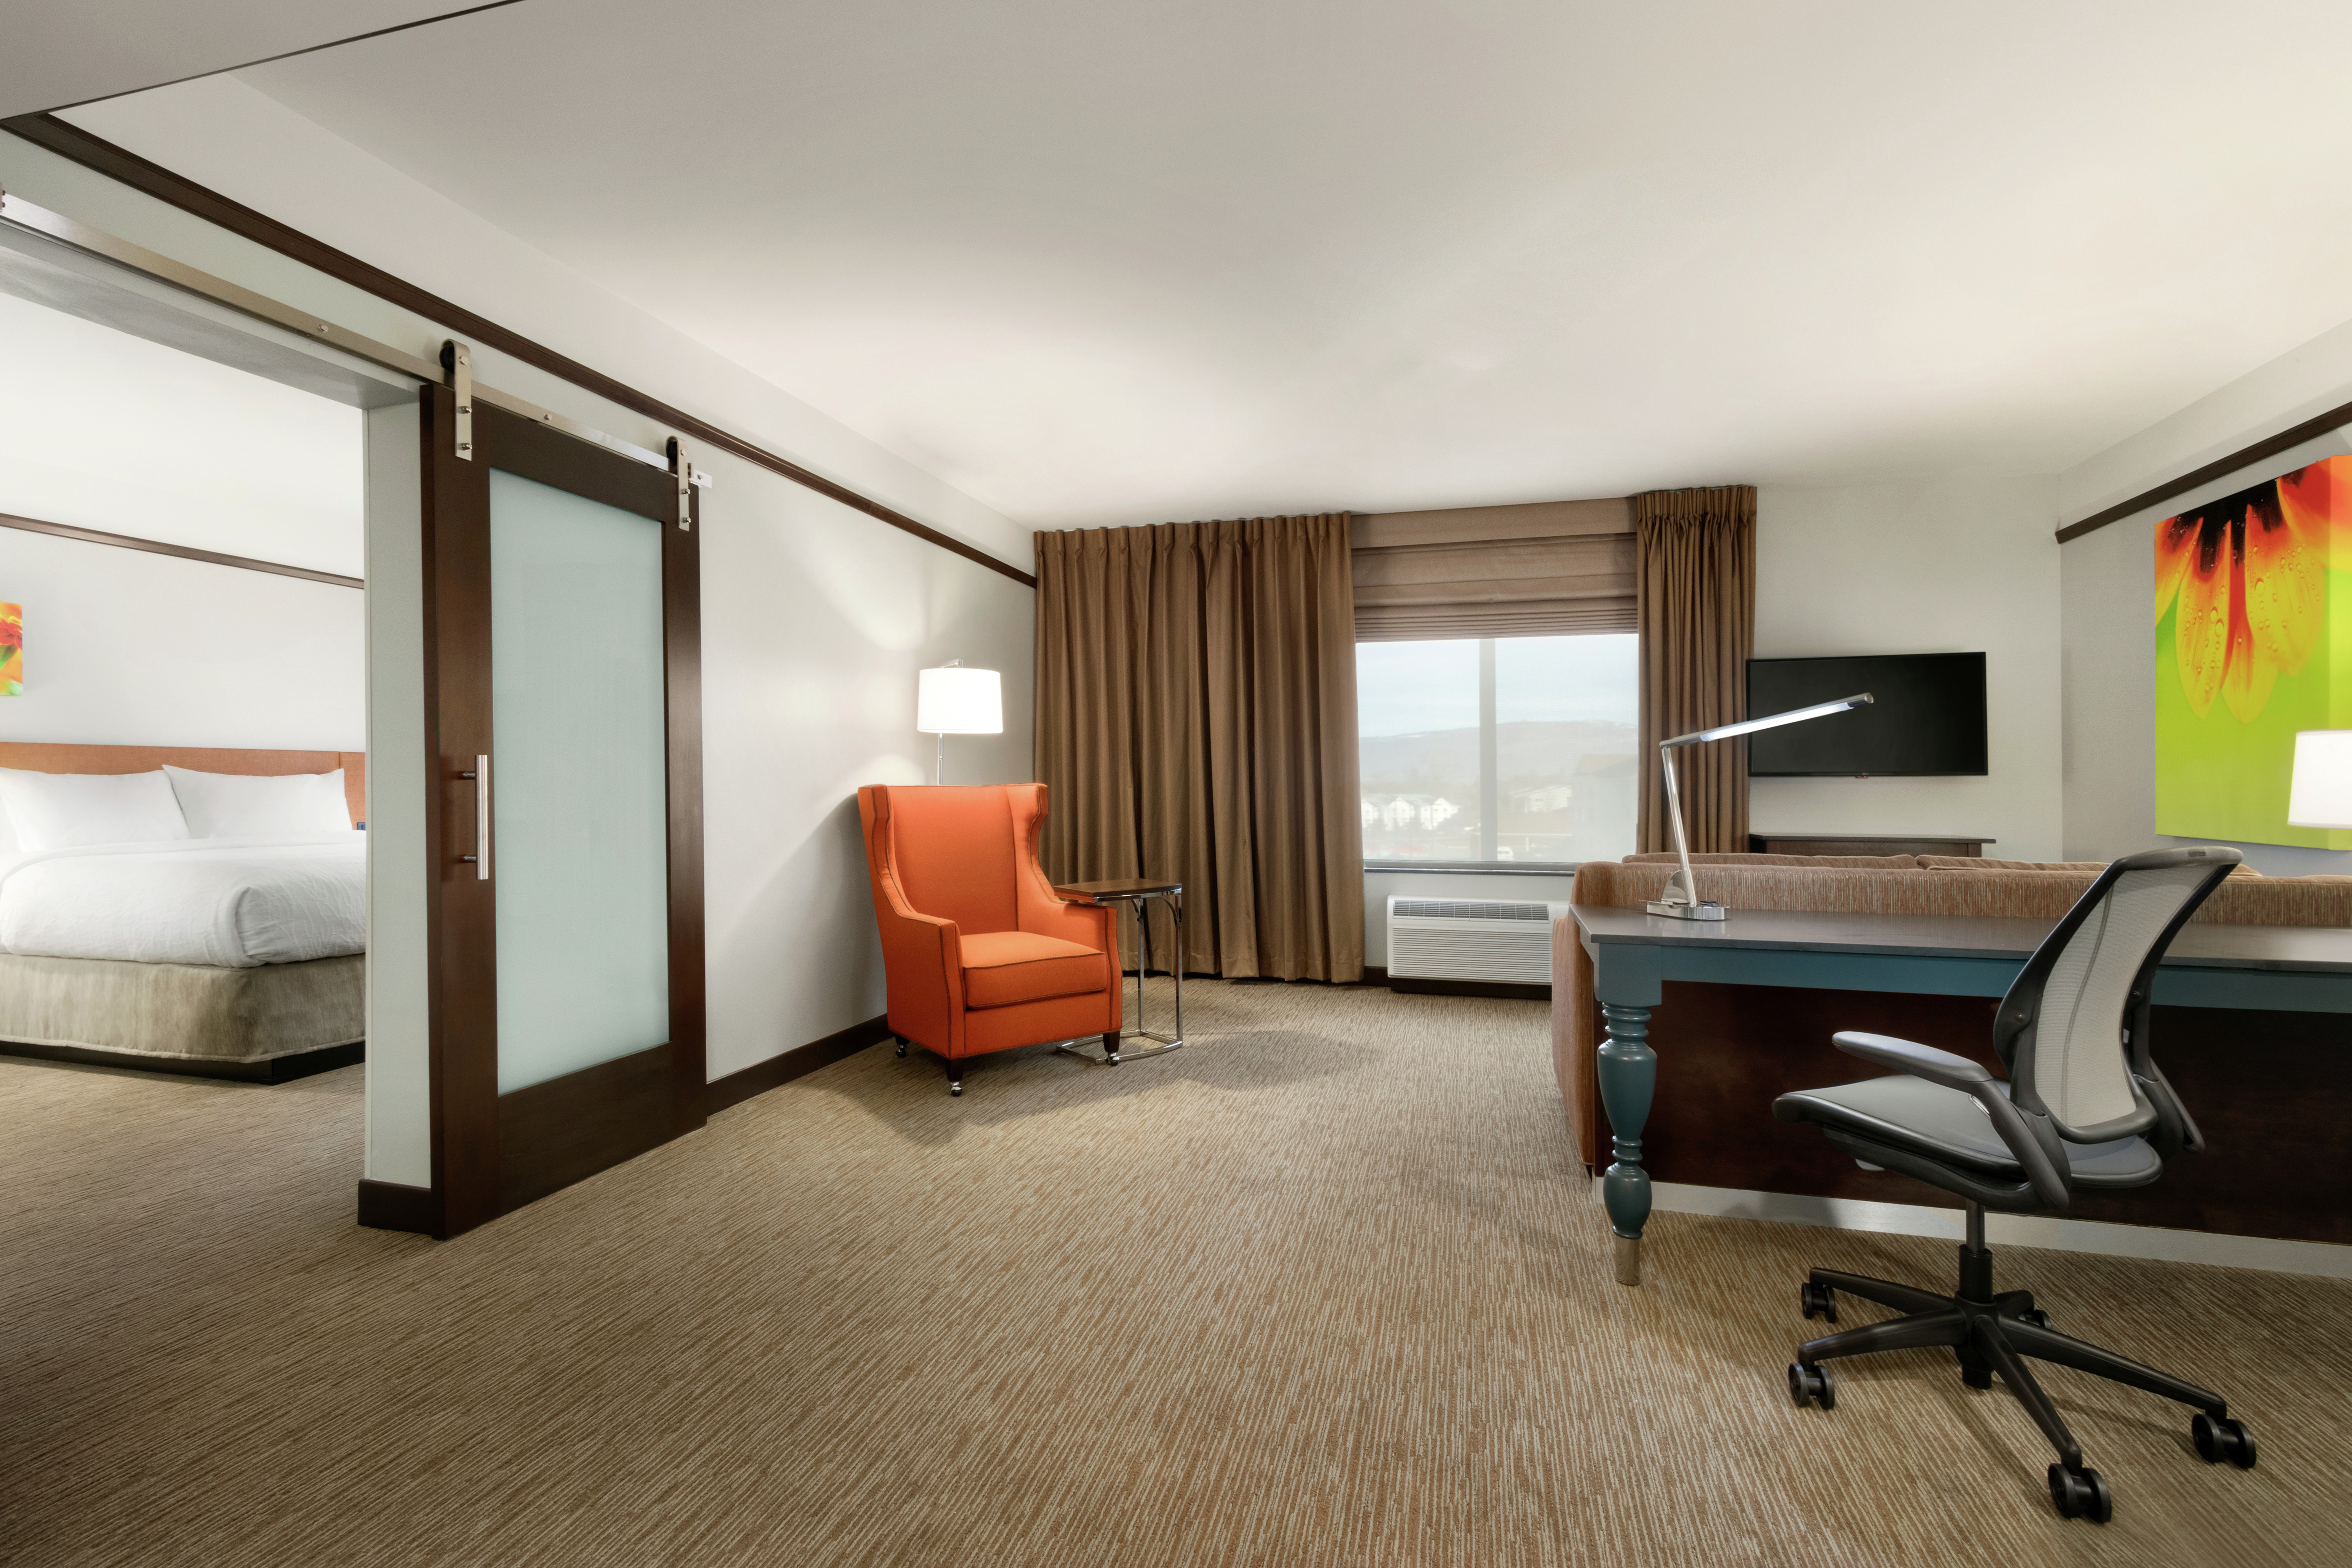 Suite Living Area with Work Desk and Separate Bedroom